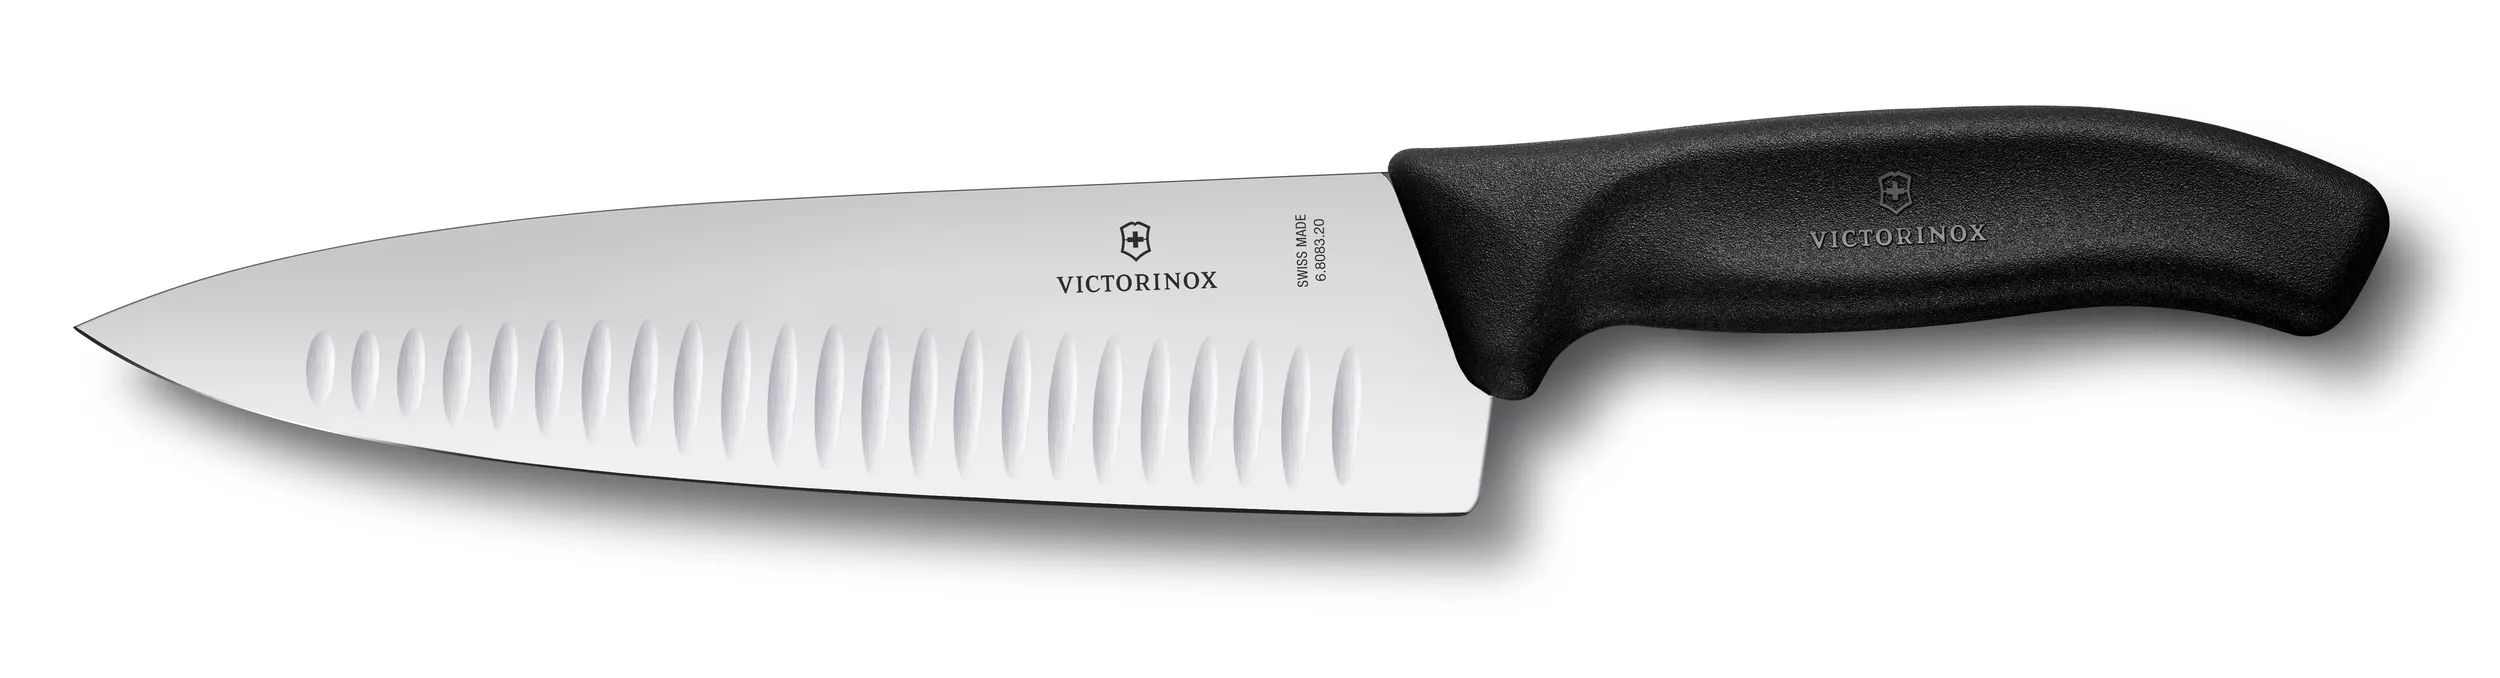 SwissClassic Carving Knife 8-inch, fluted edge-6.8083.20G